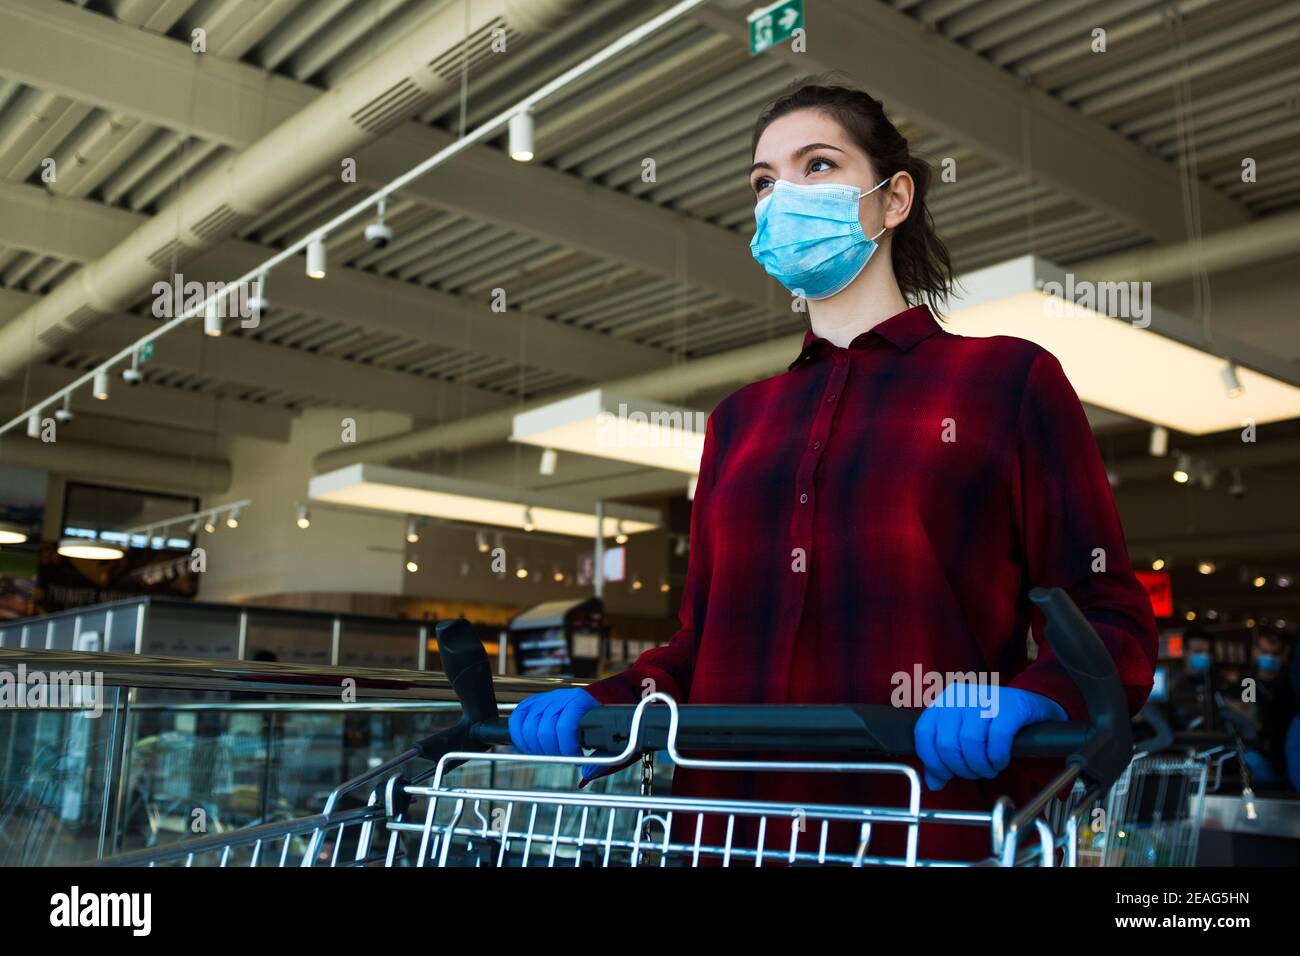 Young caucasian woman pushing shopping cart in supermarket, wearing protective blue surgical face mask and latex gloves, health and safety measurement Stock Photo